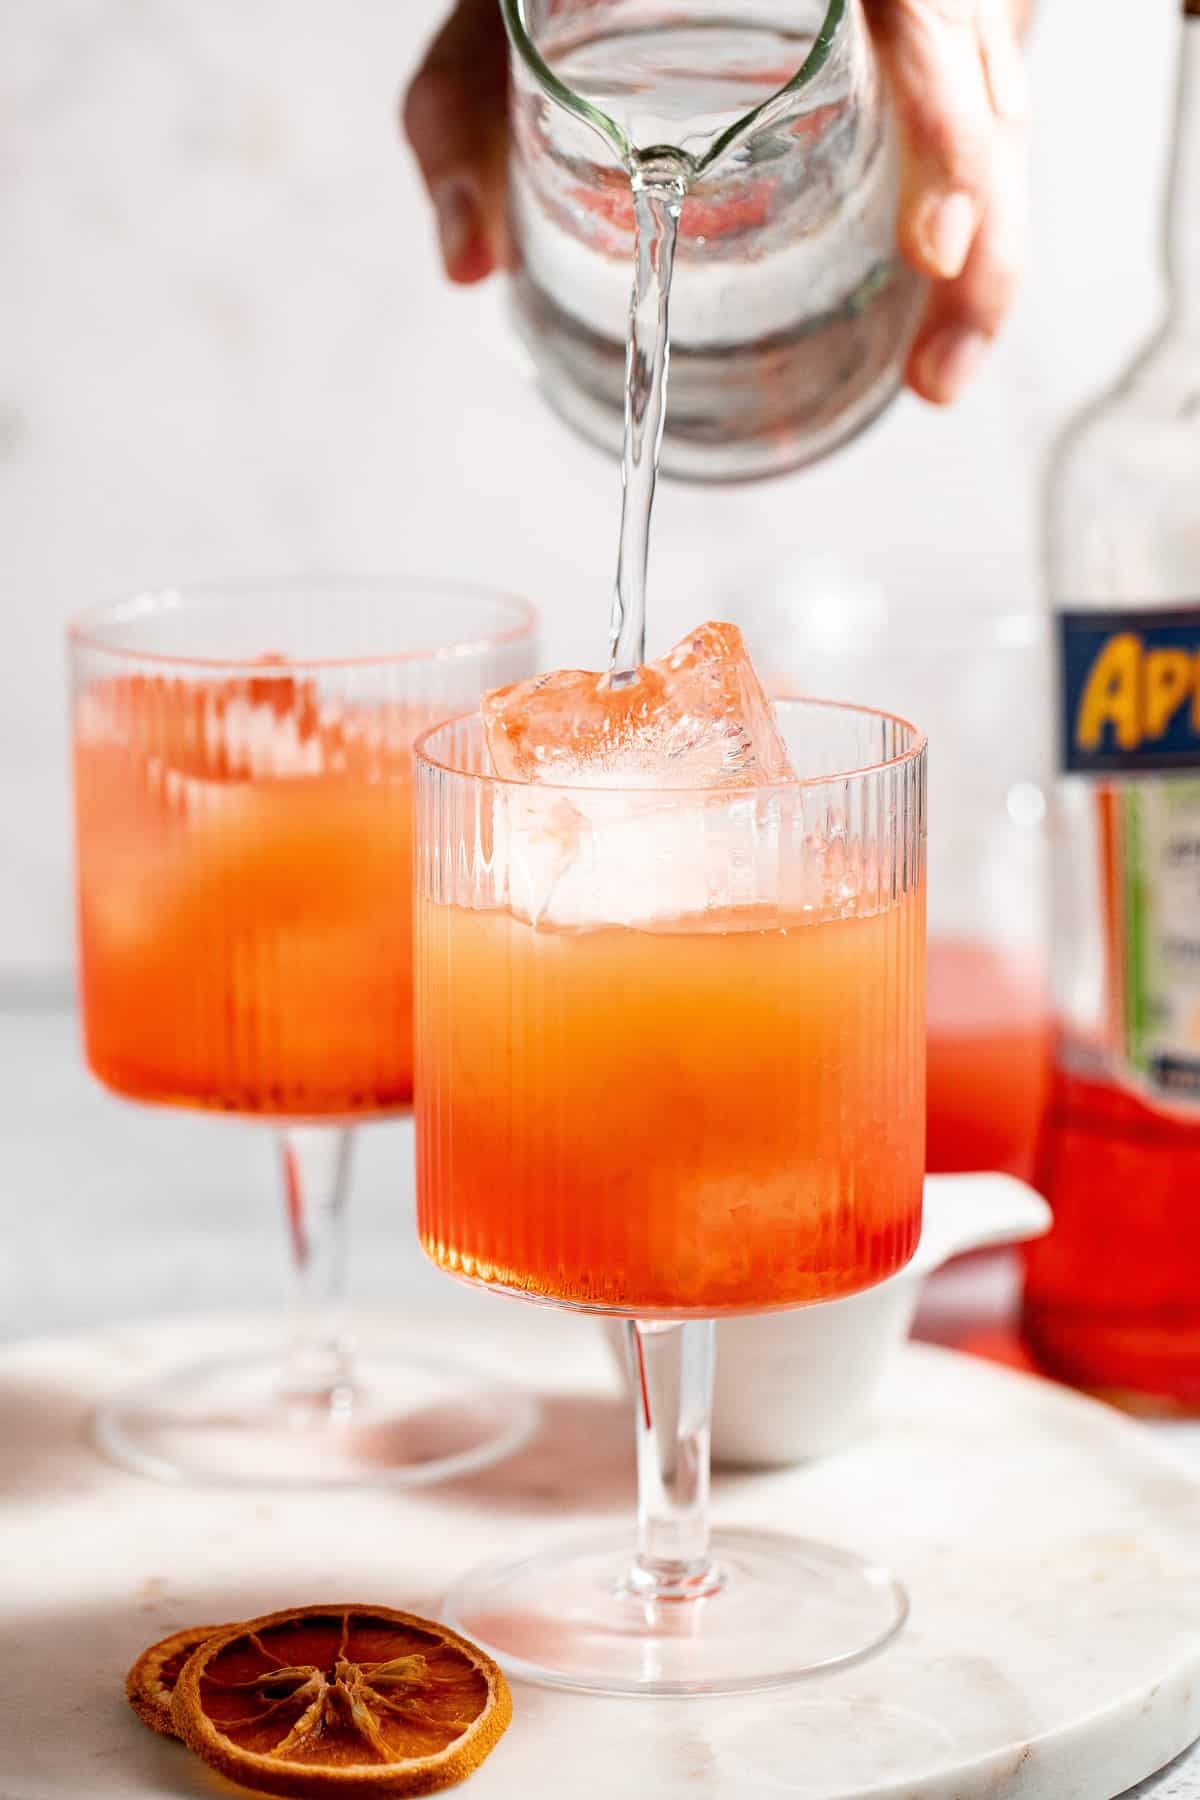 Club soda being poured over an aperol spritz with a second drink and aperol bottle in the background.